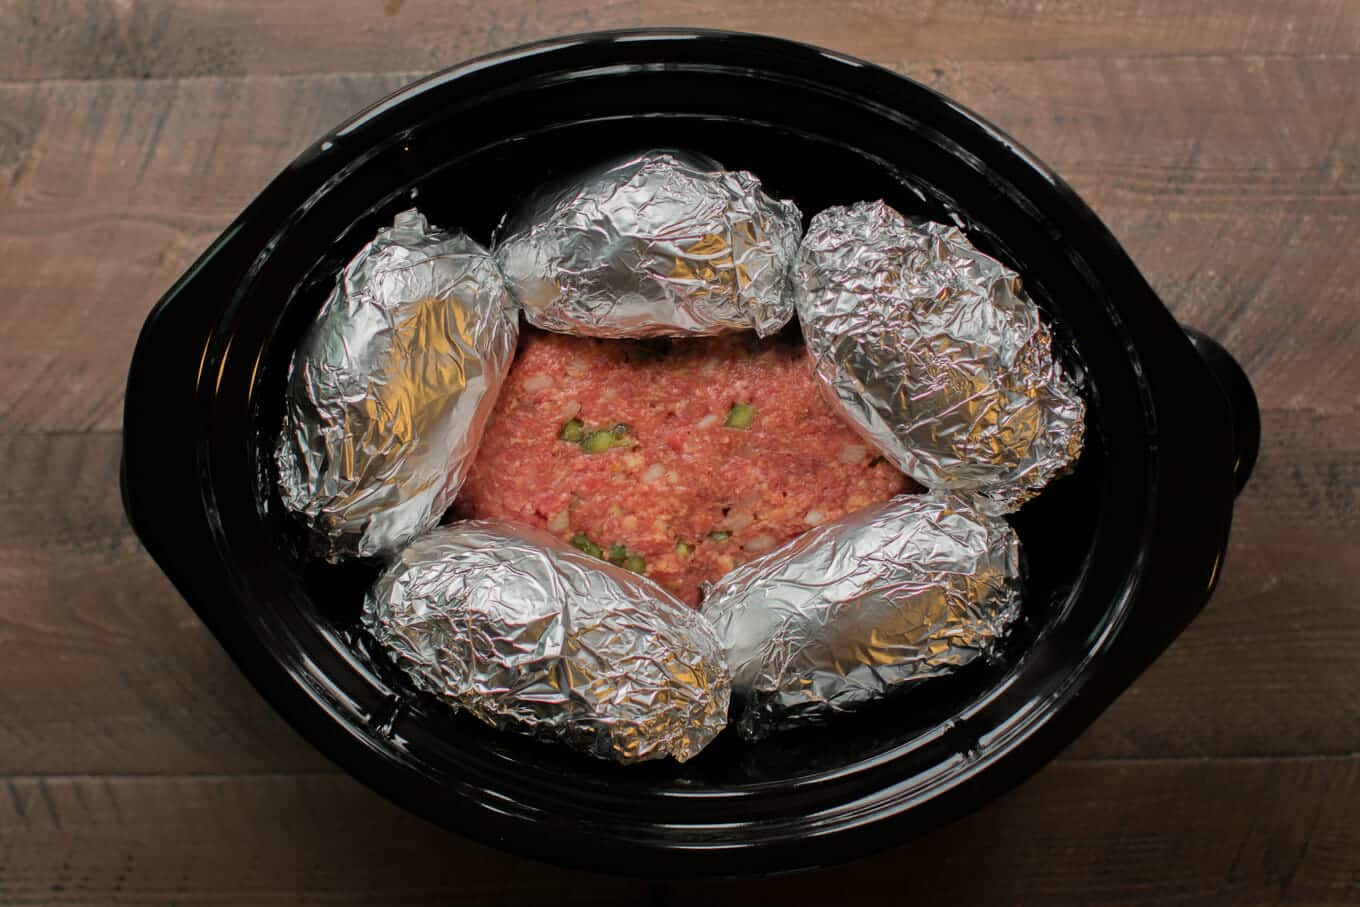 raw meatloaf in slow cooker, 5 potatoes wrapped in foil on top